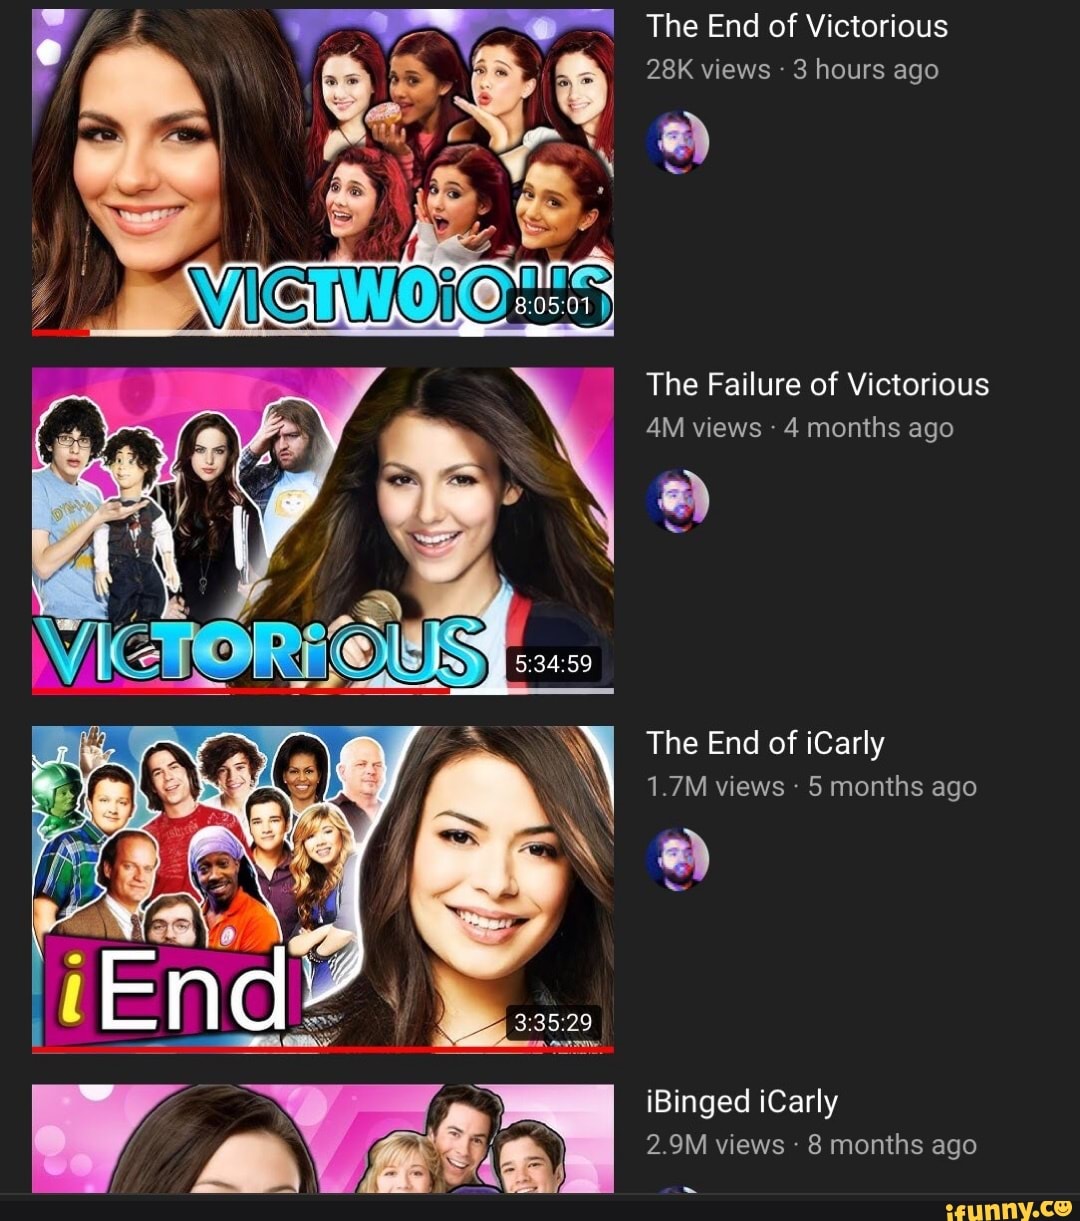 The End of Victorious views 3 hours ago The Failure of Victorious